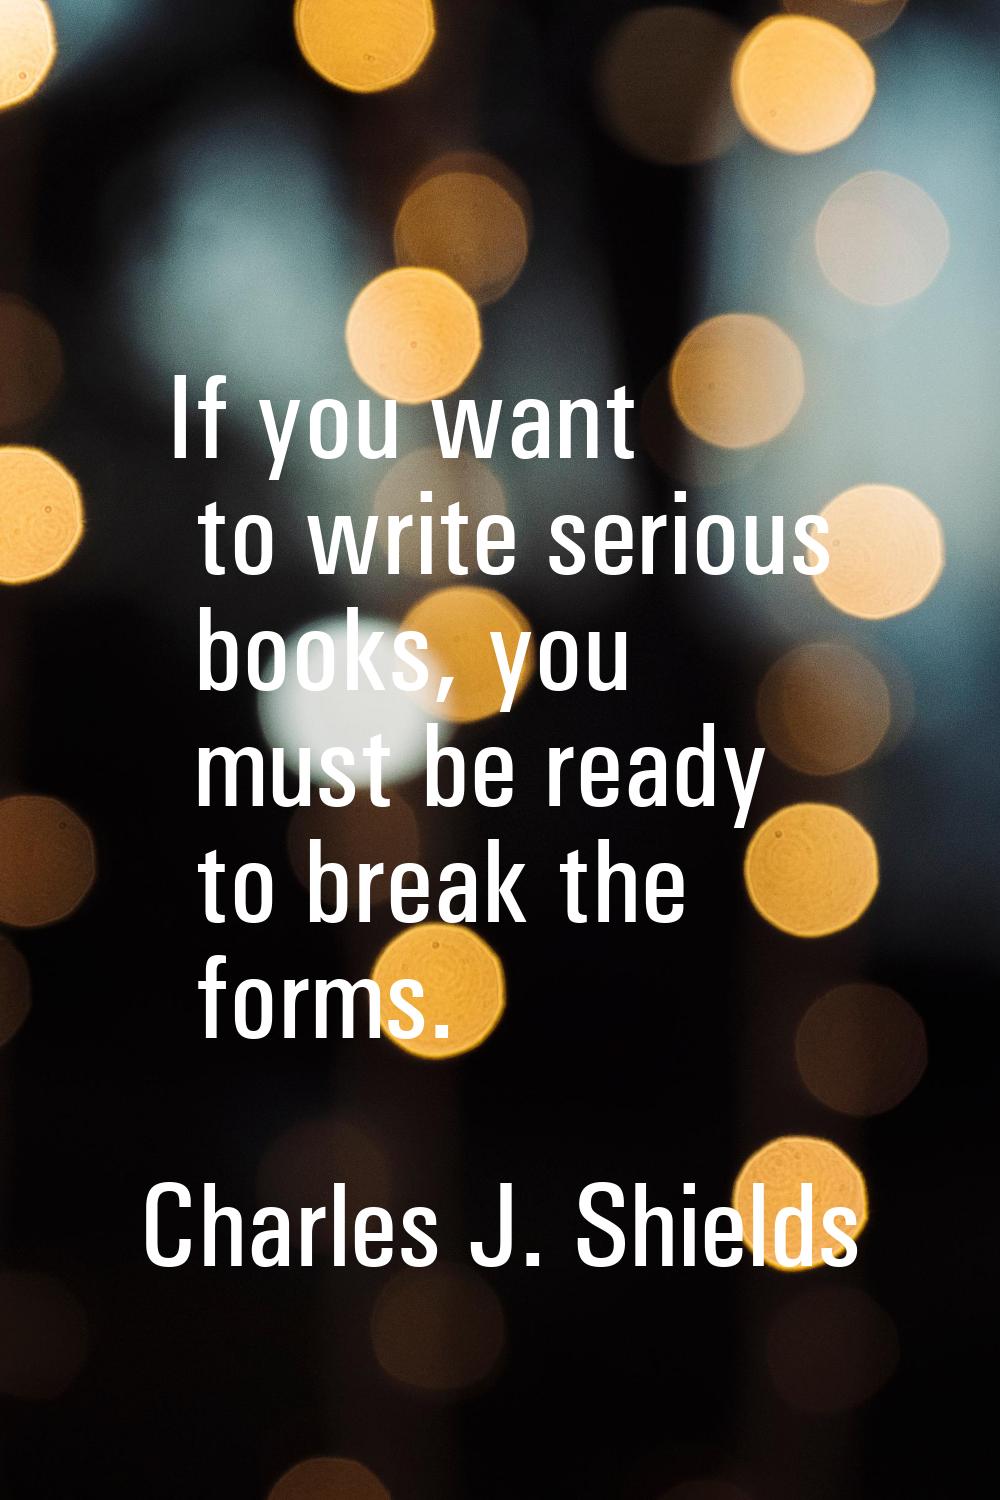 If you want to write serious books, you must be ready to break the forms.